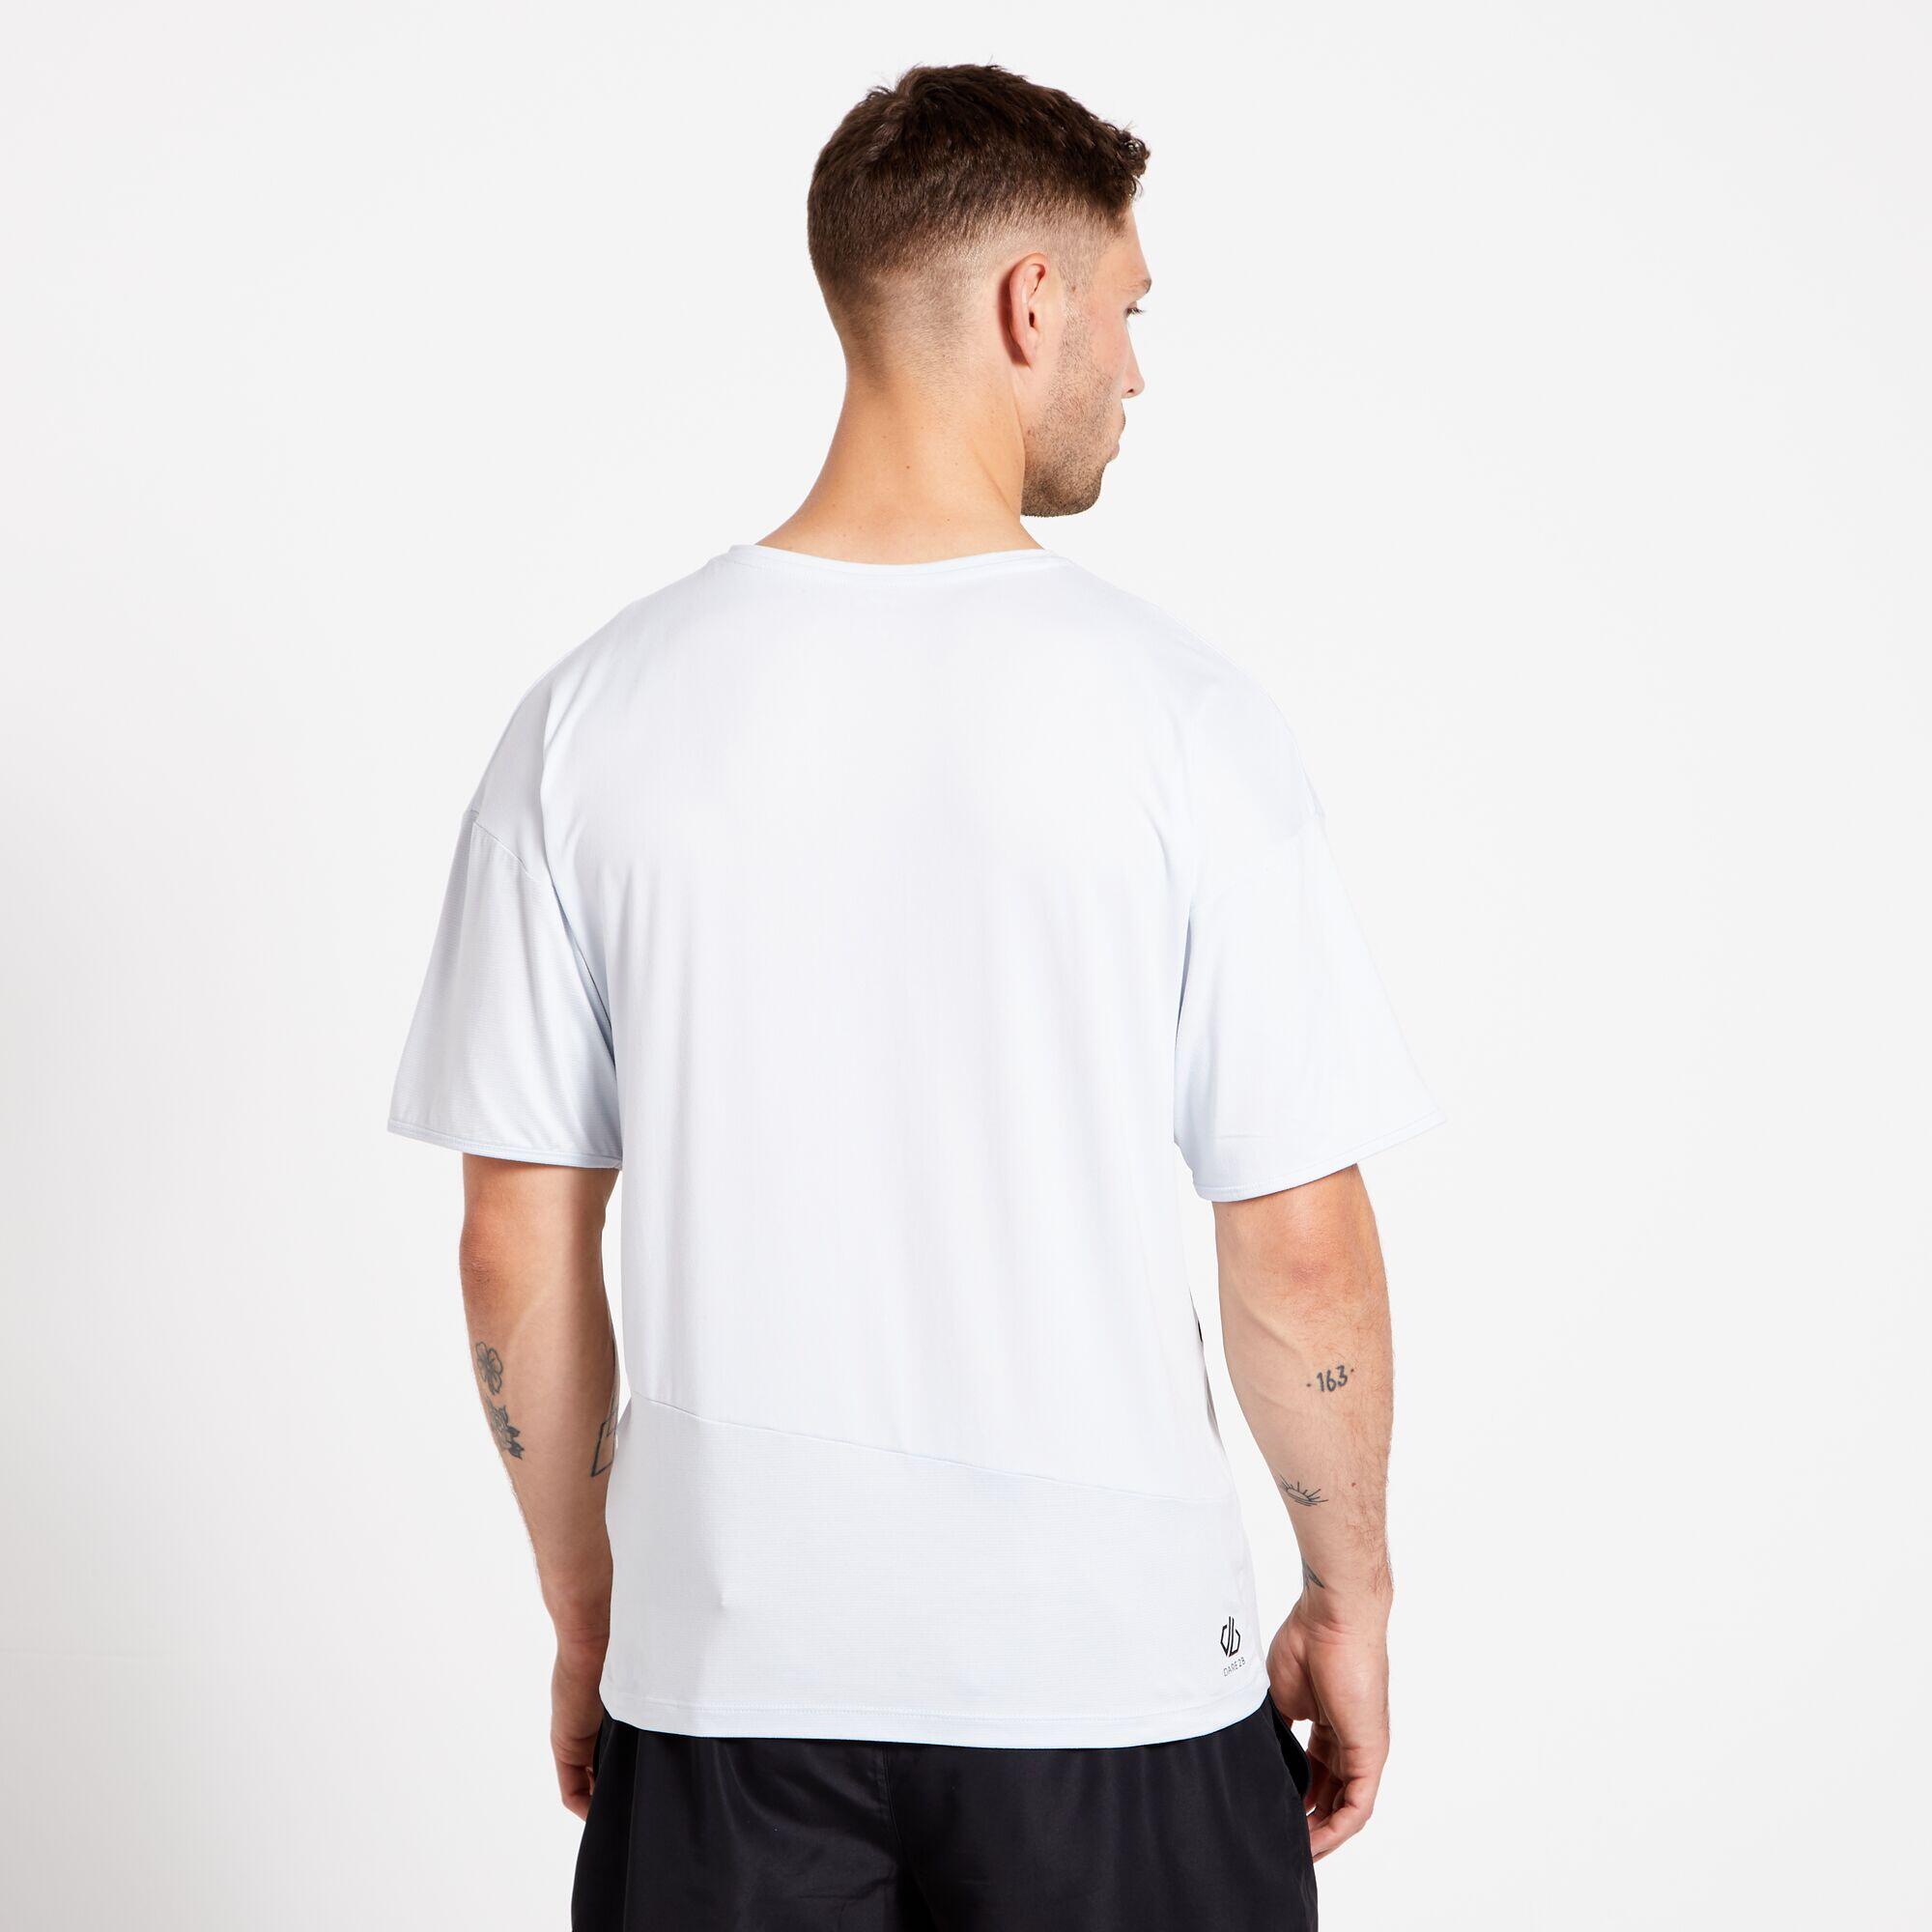 Henry Holland No Sweat Mens Gym Active T-Shirt - White 2/4